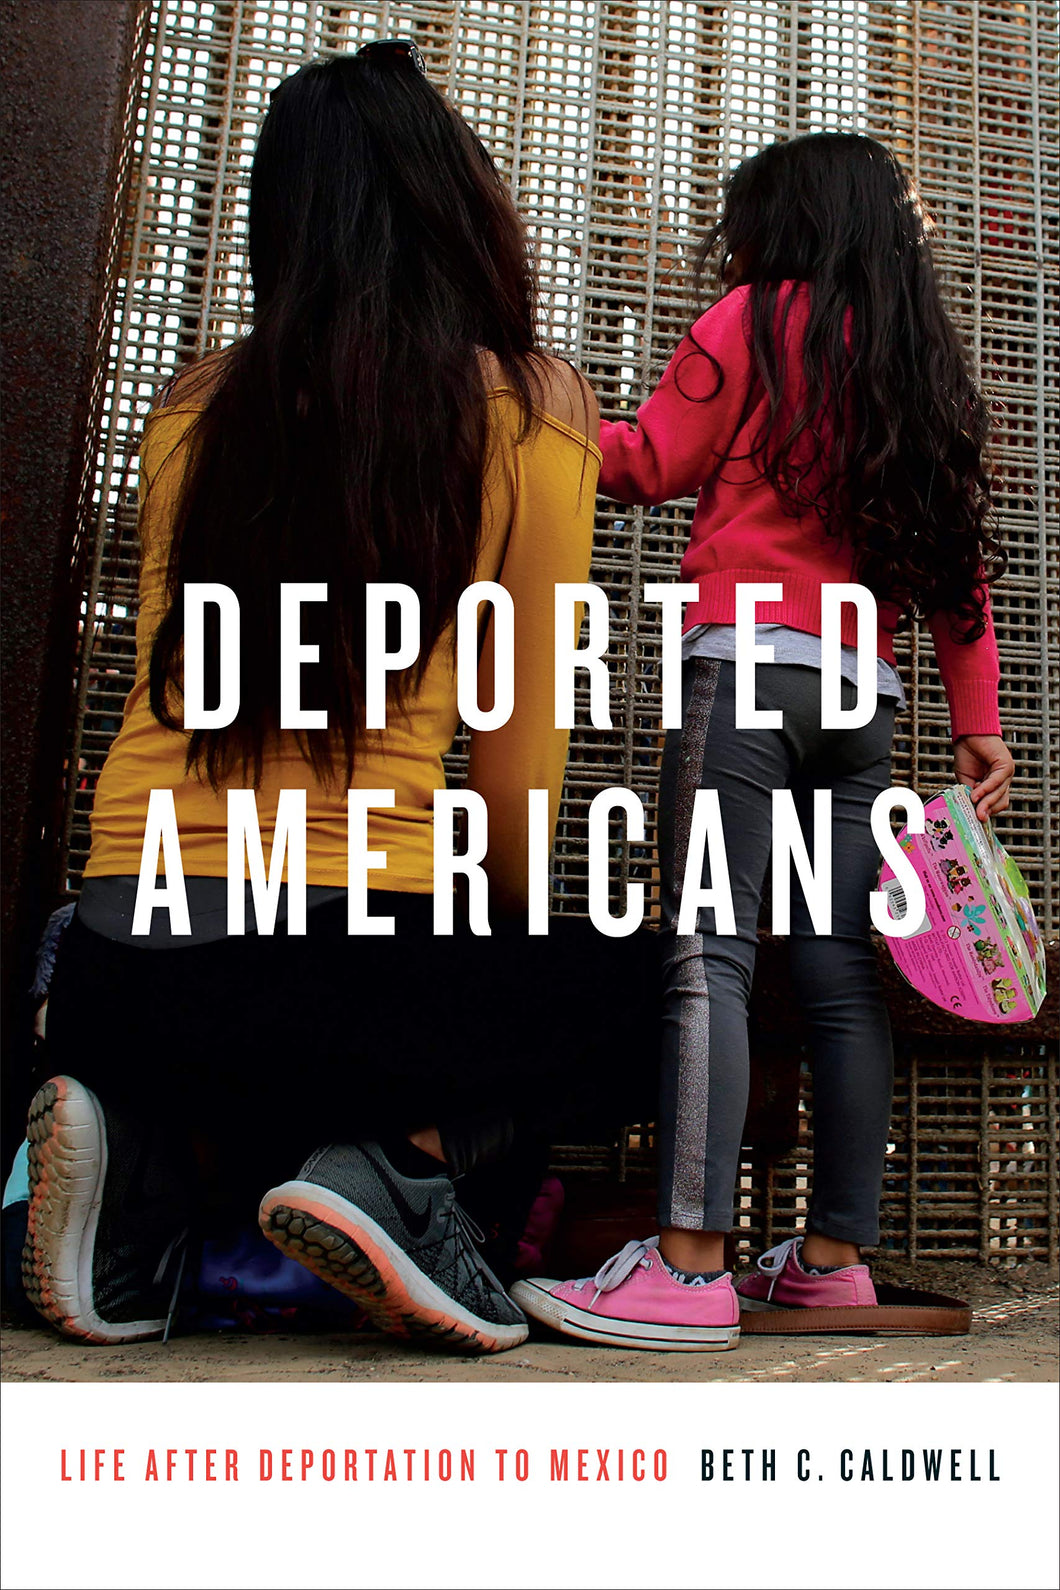 Deported Americans: Life after Deportation to Mexico by Beth C. Caldwell